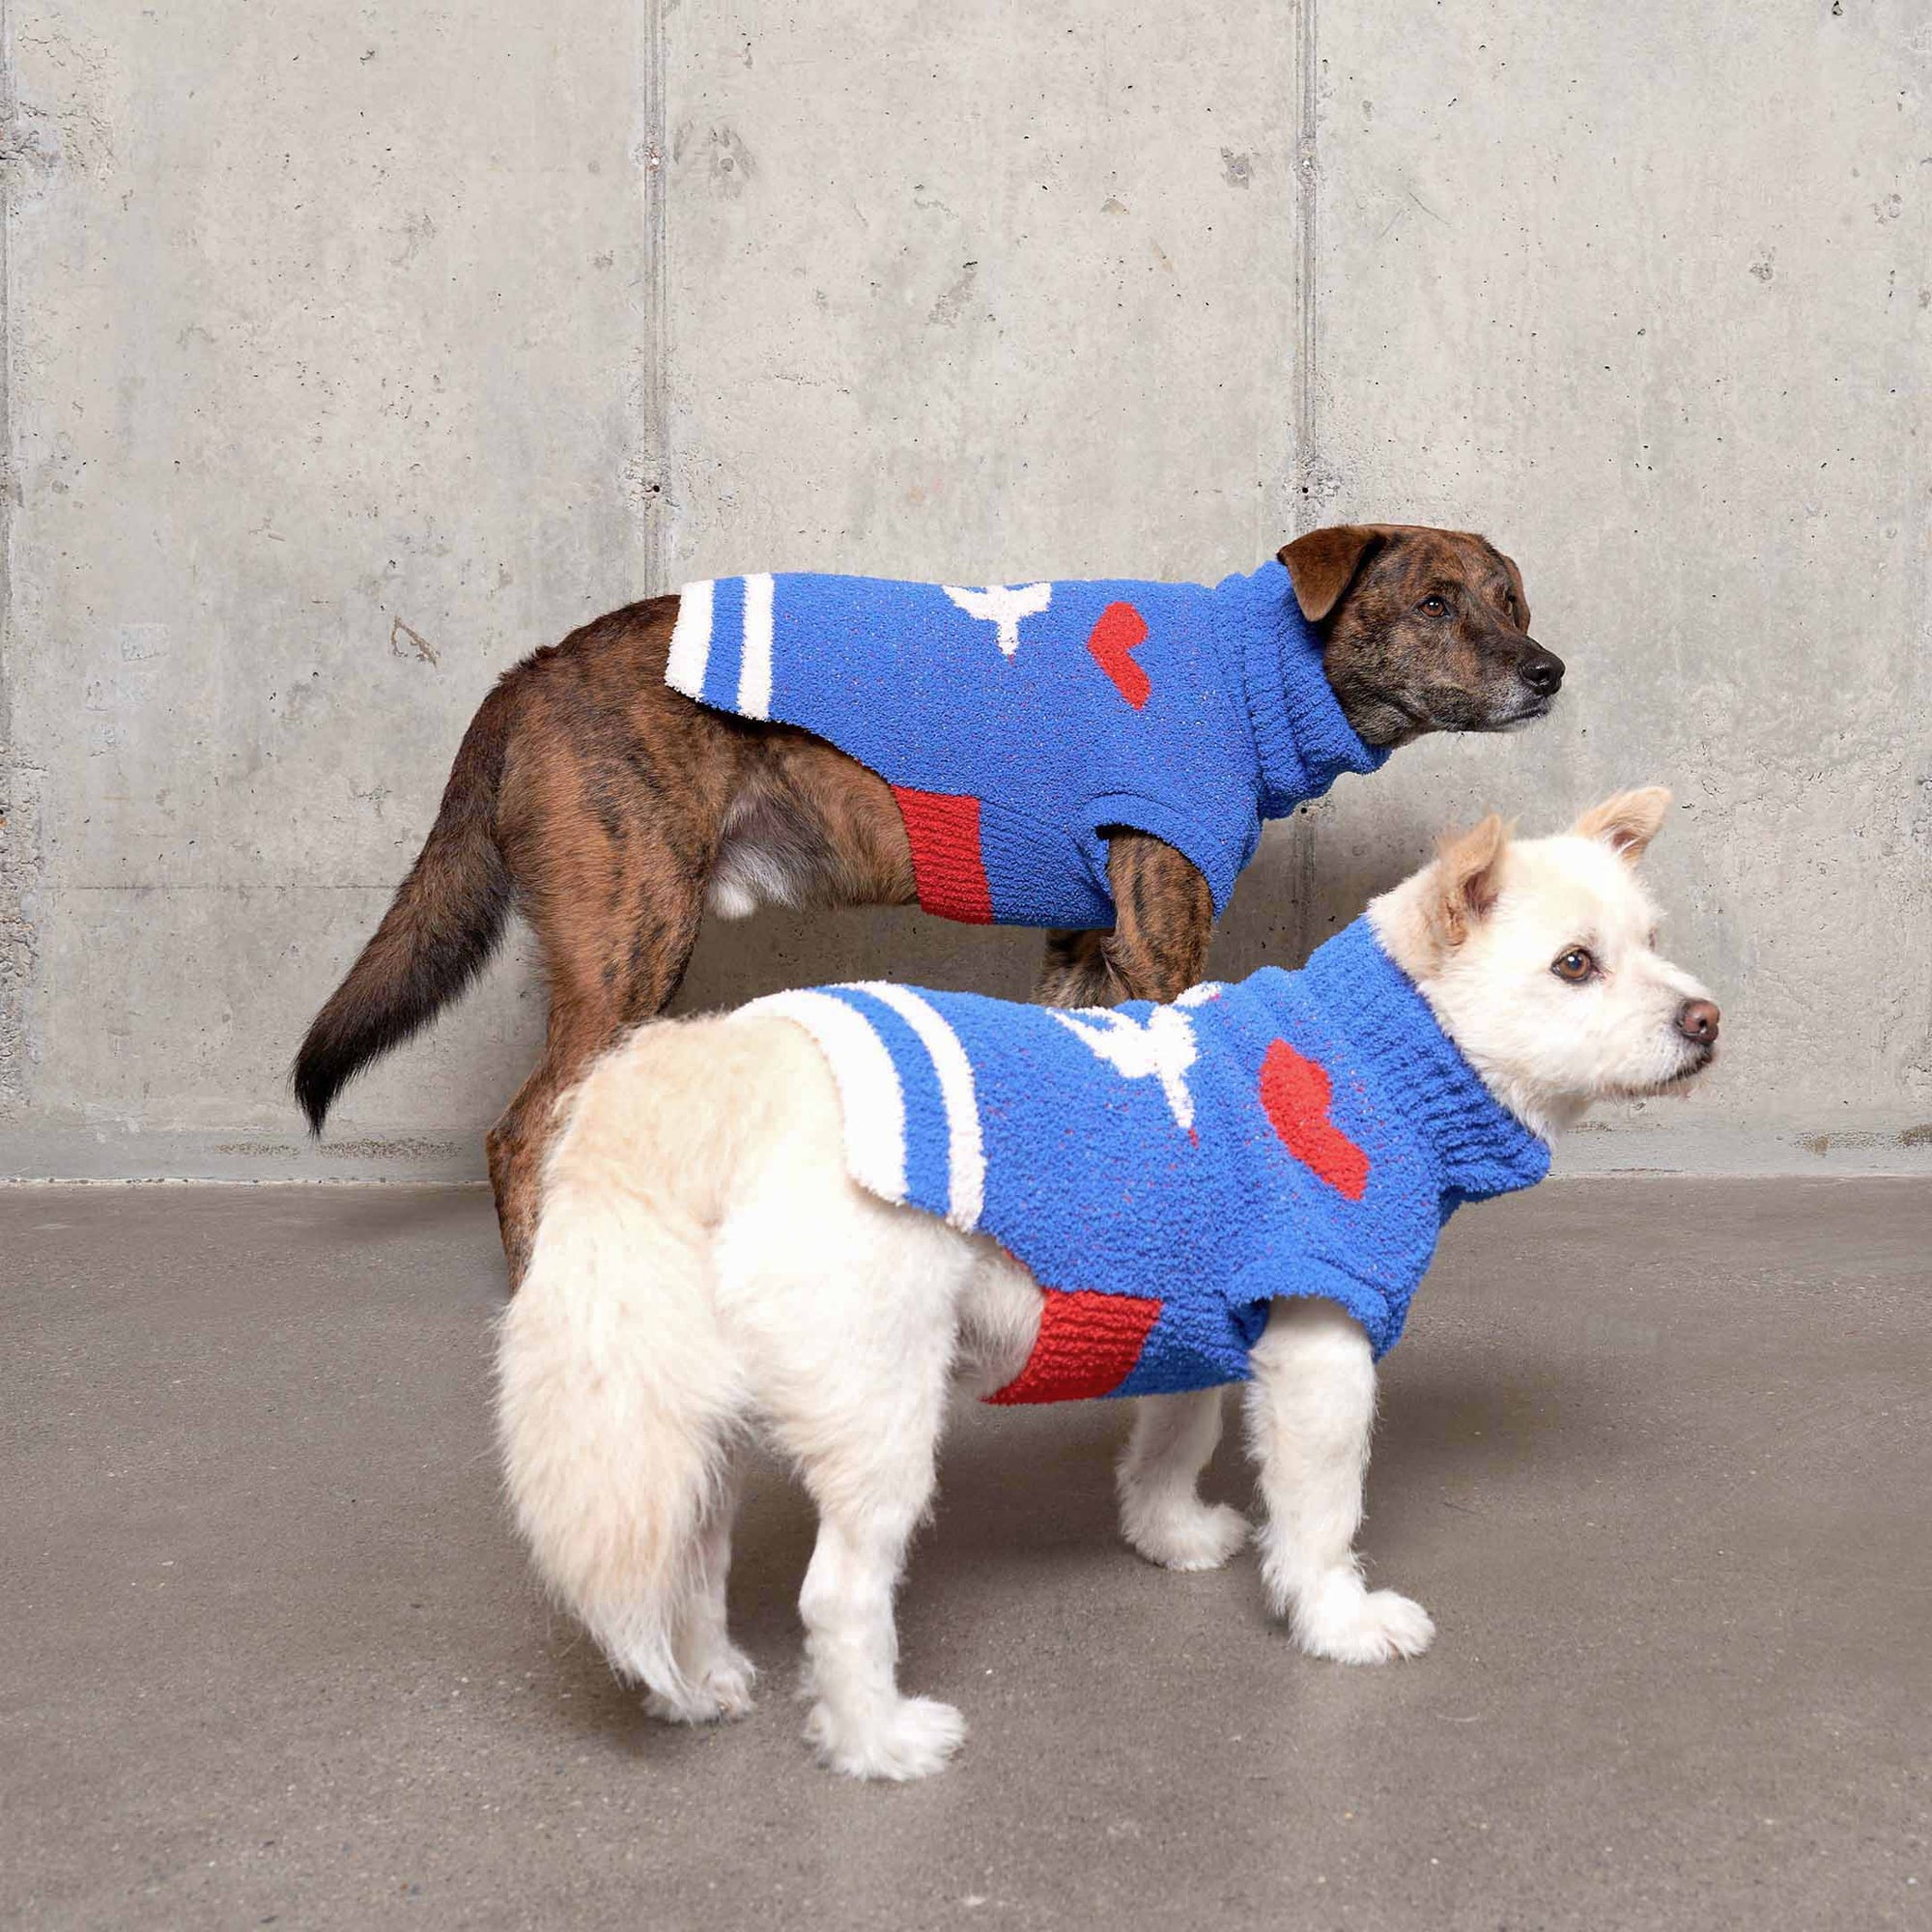  Two dogs, a brindle one and a white one, in blue "The Furryfolks" love bird sweaters against a grey concrete wall.